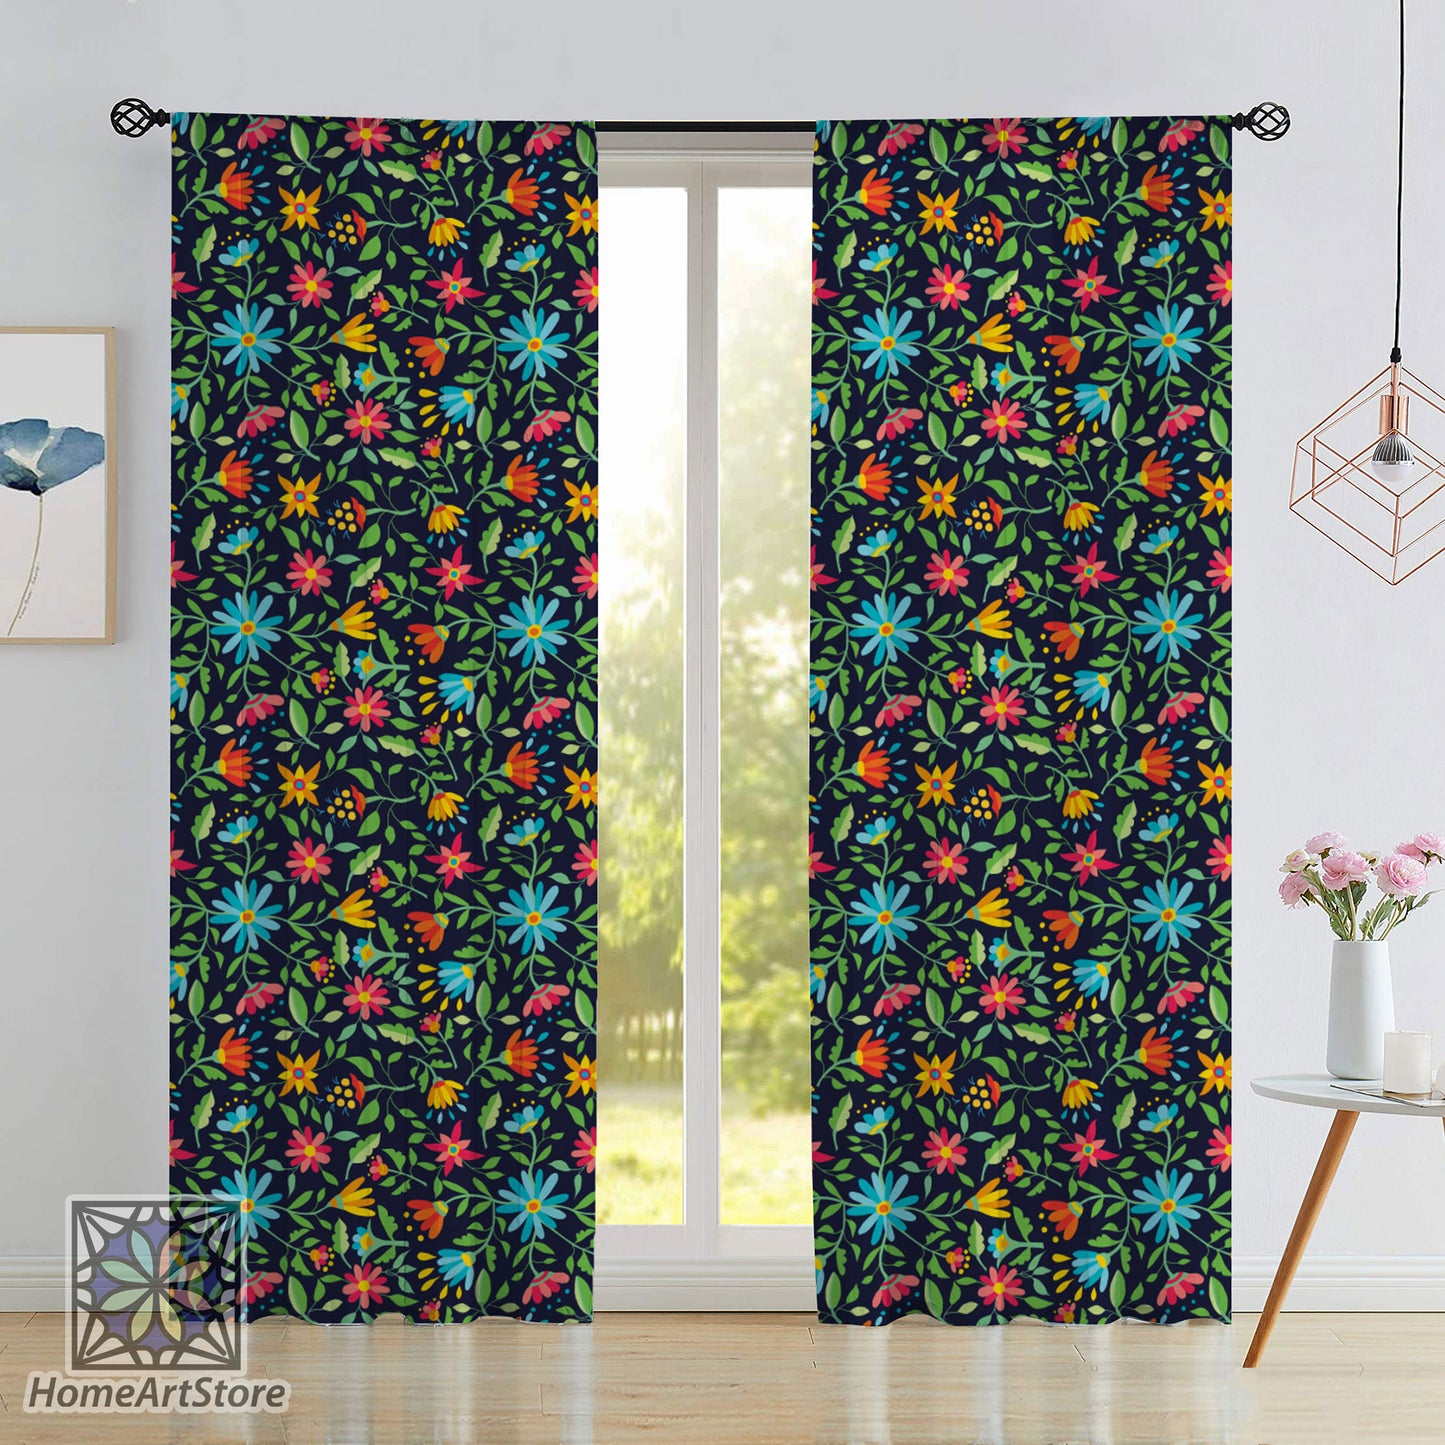 Flower Blossom Pattern Curtain, Colorful Floral Kitchen Curtain, Living Room Curtain, Botanic Home Decor